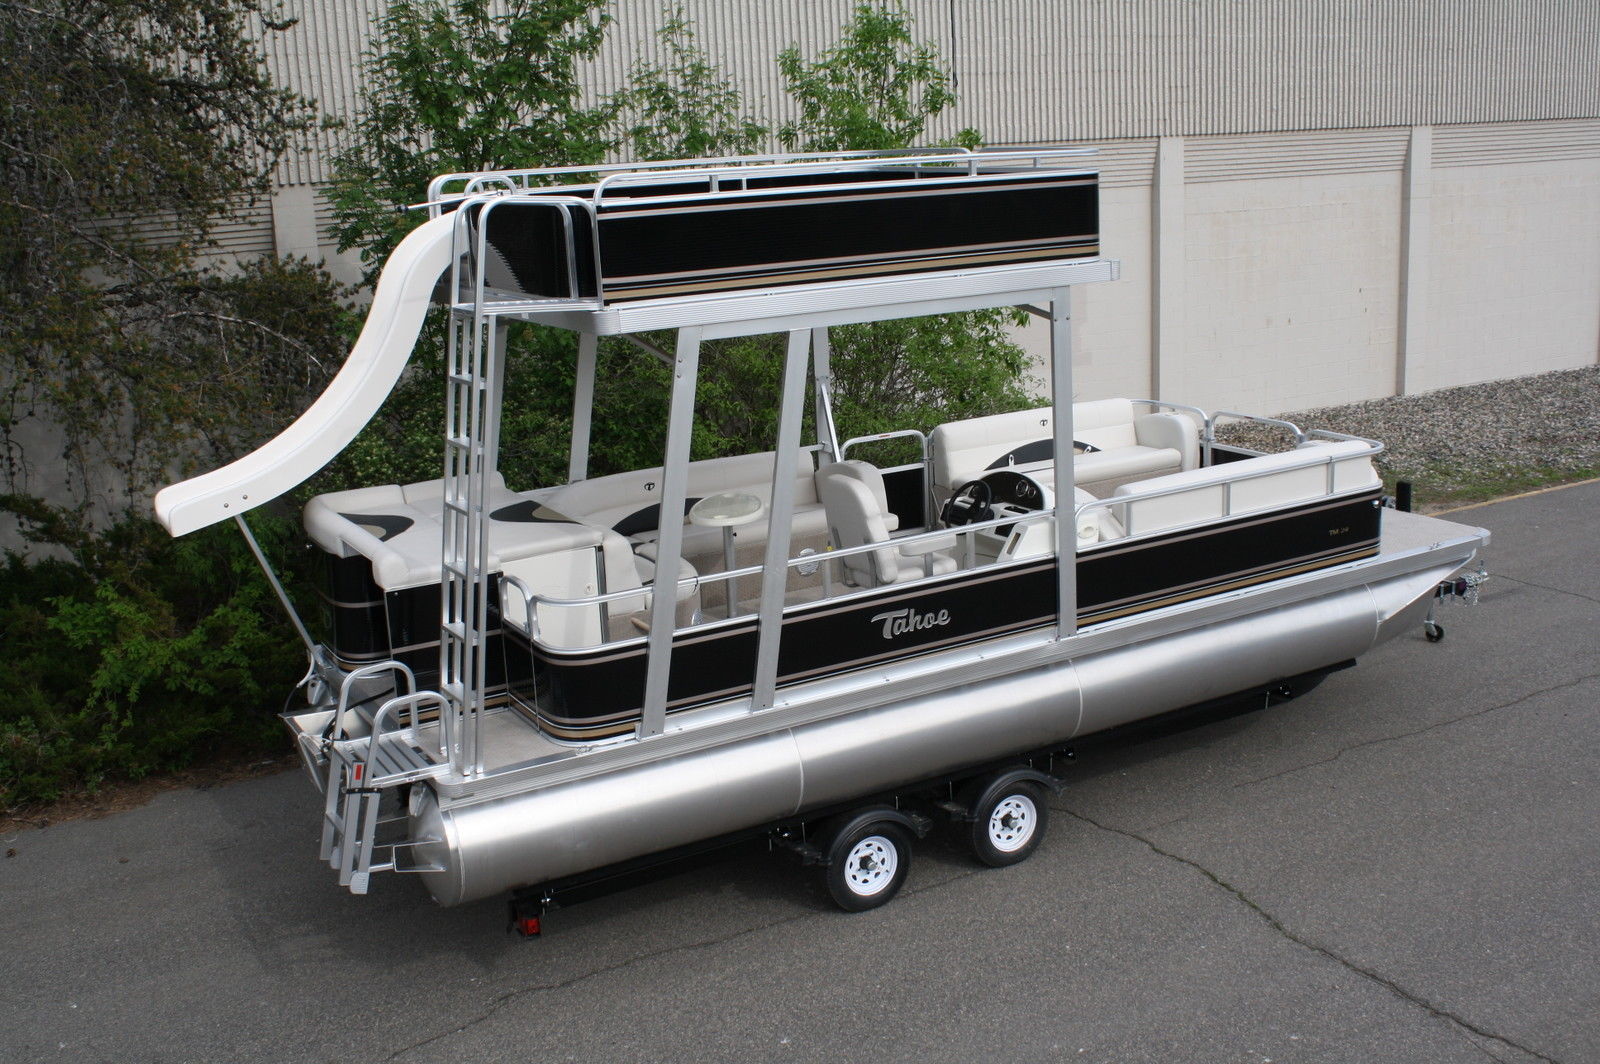 New 24 ft new Grand Island/Tahoe pontoon boat with slide. 